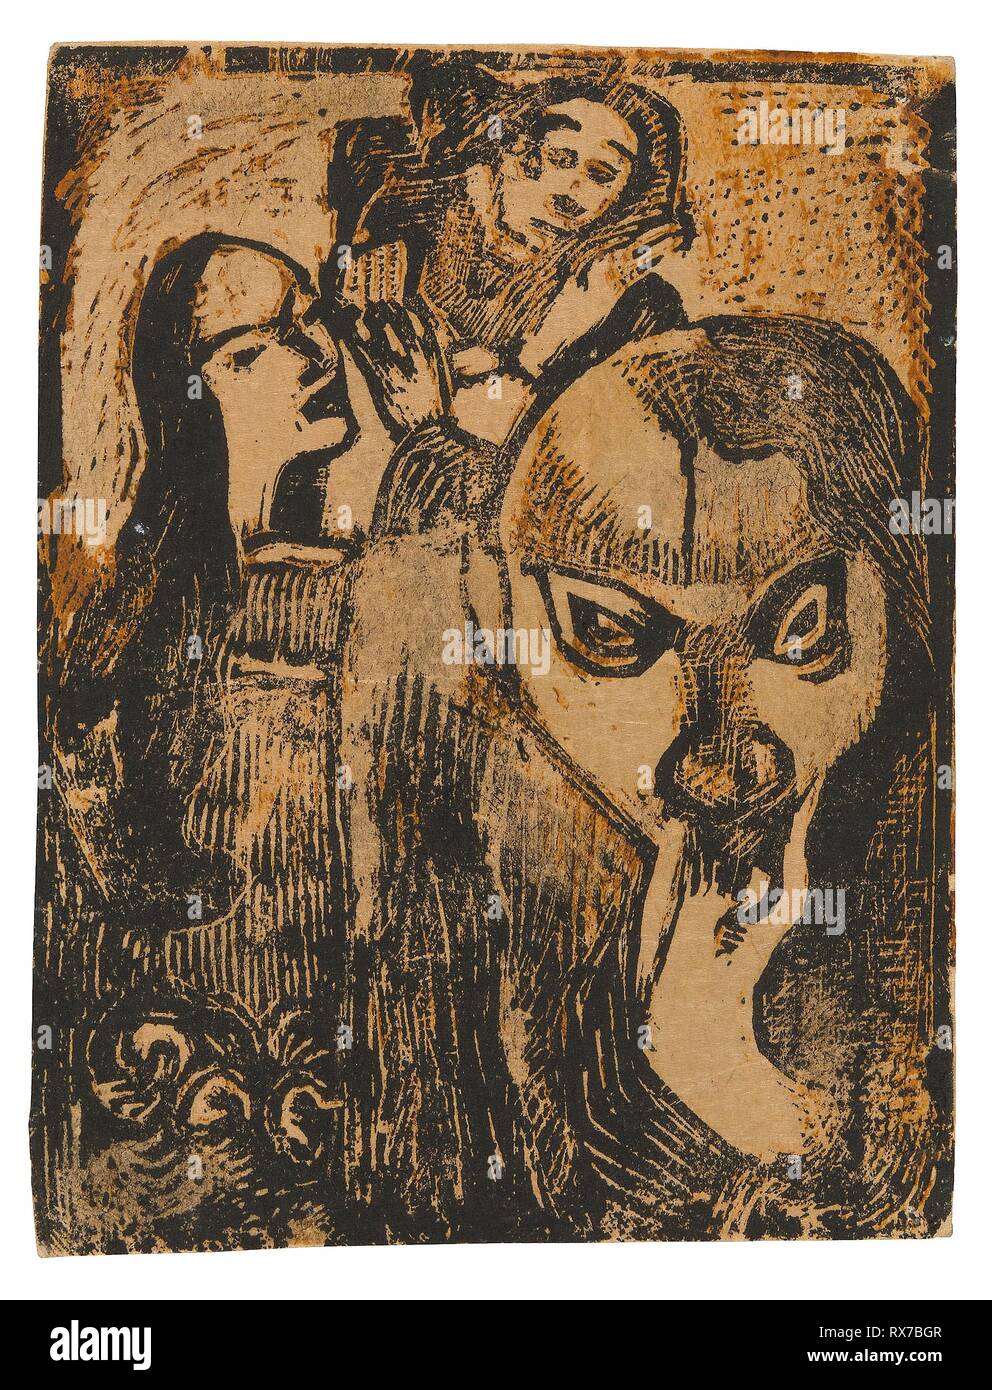 Memory of Meijer de Haan. Paul Gauguin; French, 1848-1903. Date: 1896-1897. Dimensions: 106 × 81 mm (image/sheet). Wood-block print printed twice in black and brown ink, with dry brush and gray and ocher watercolor, on cream Japanese paper. Origin: France. Museum: The Chicago Art Institute. Stock Photo